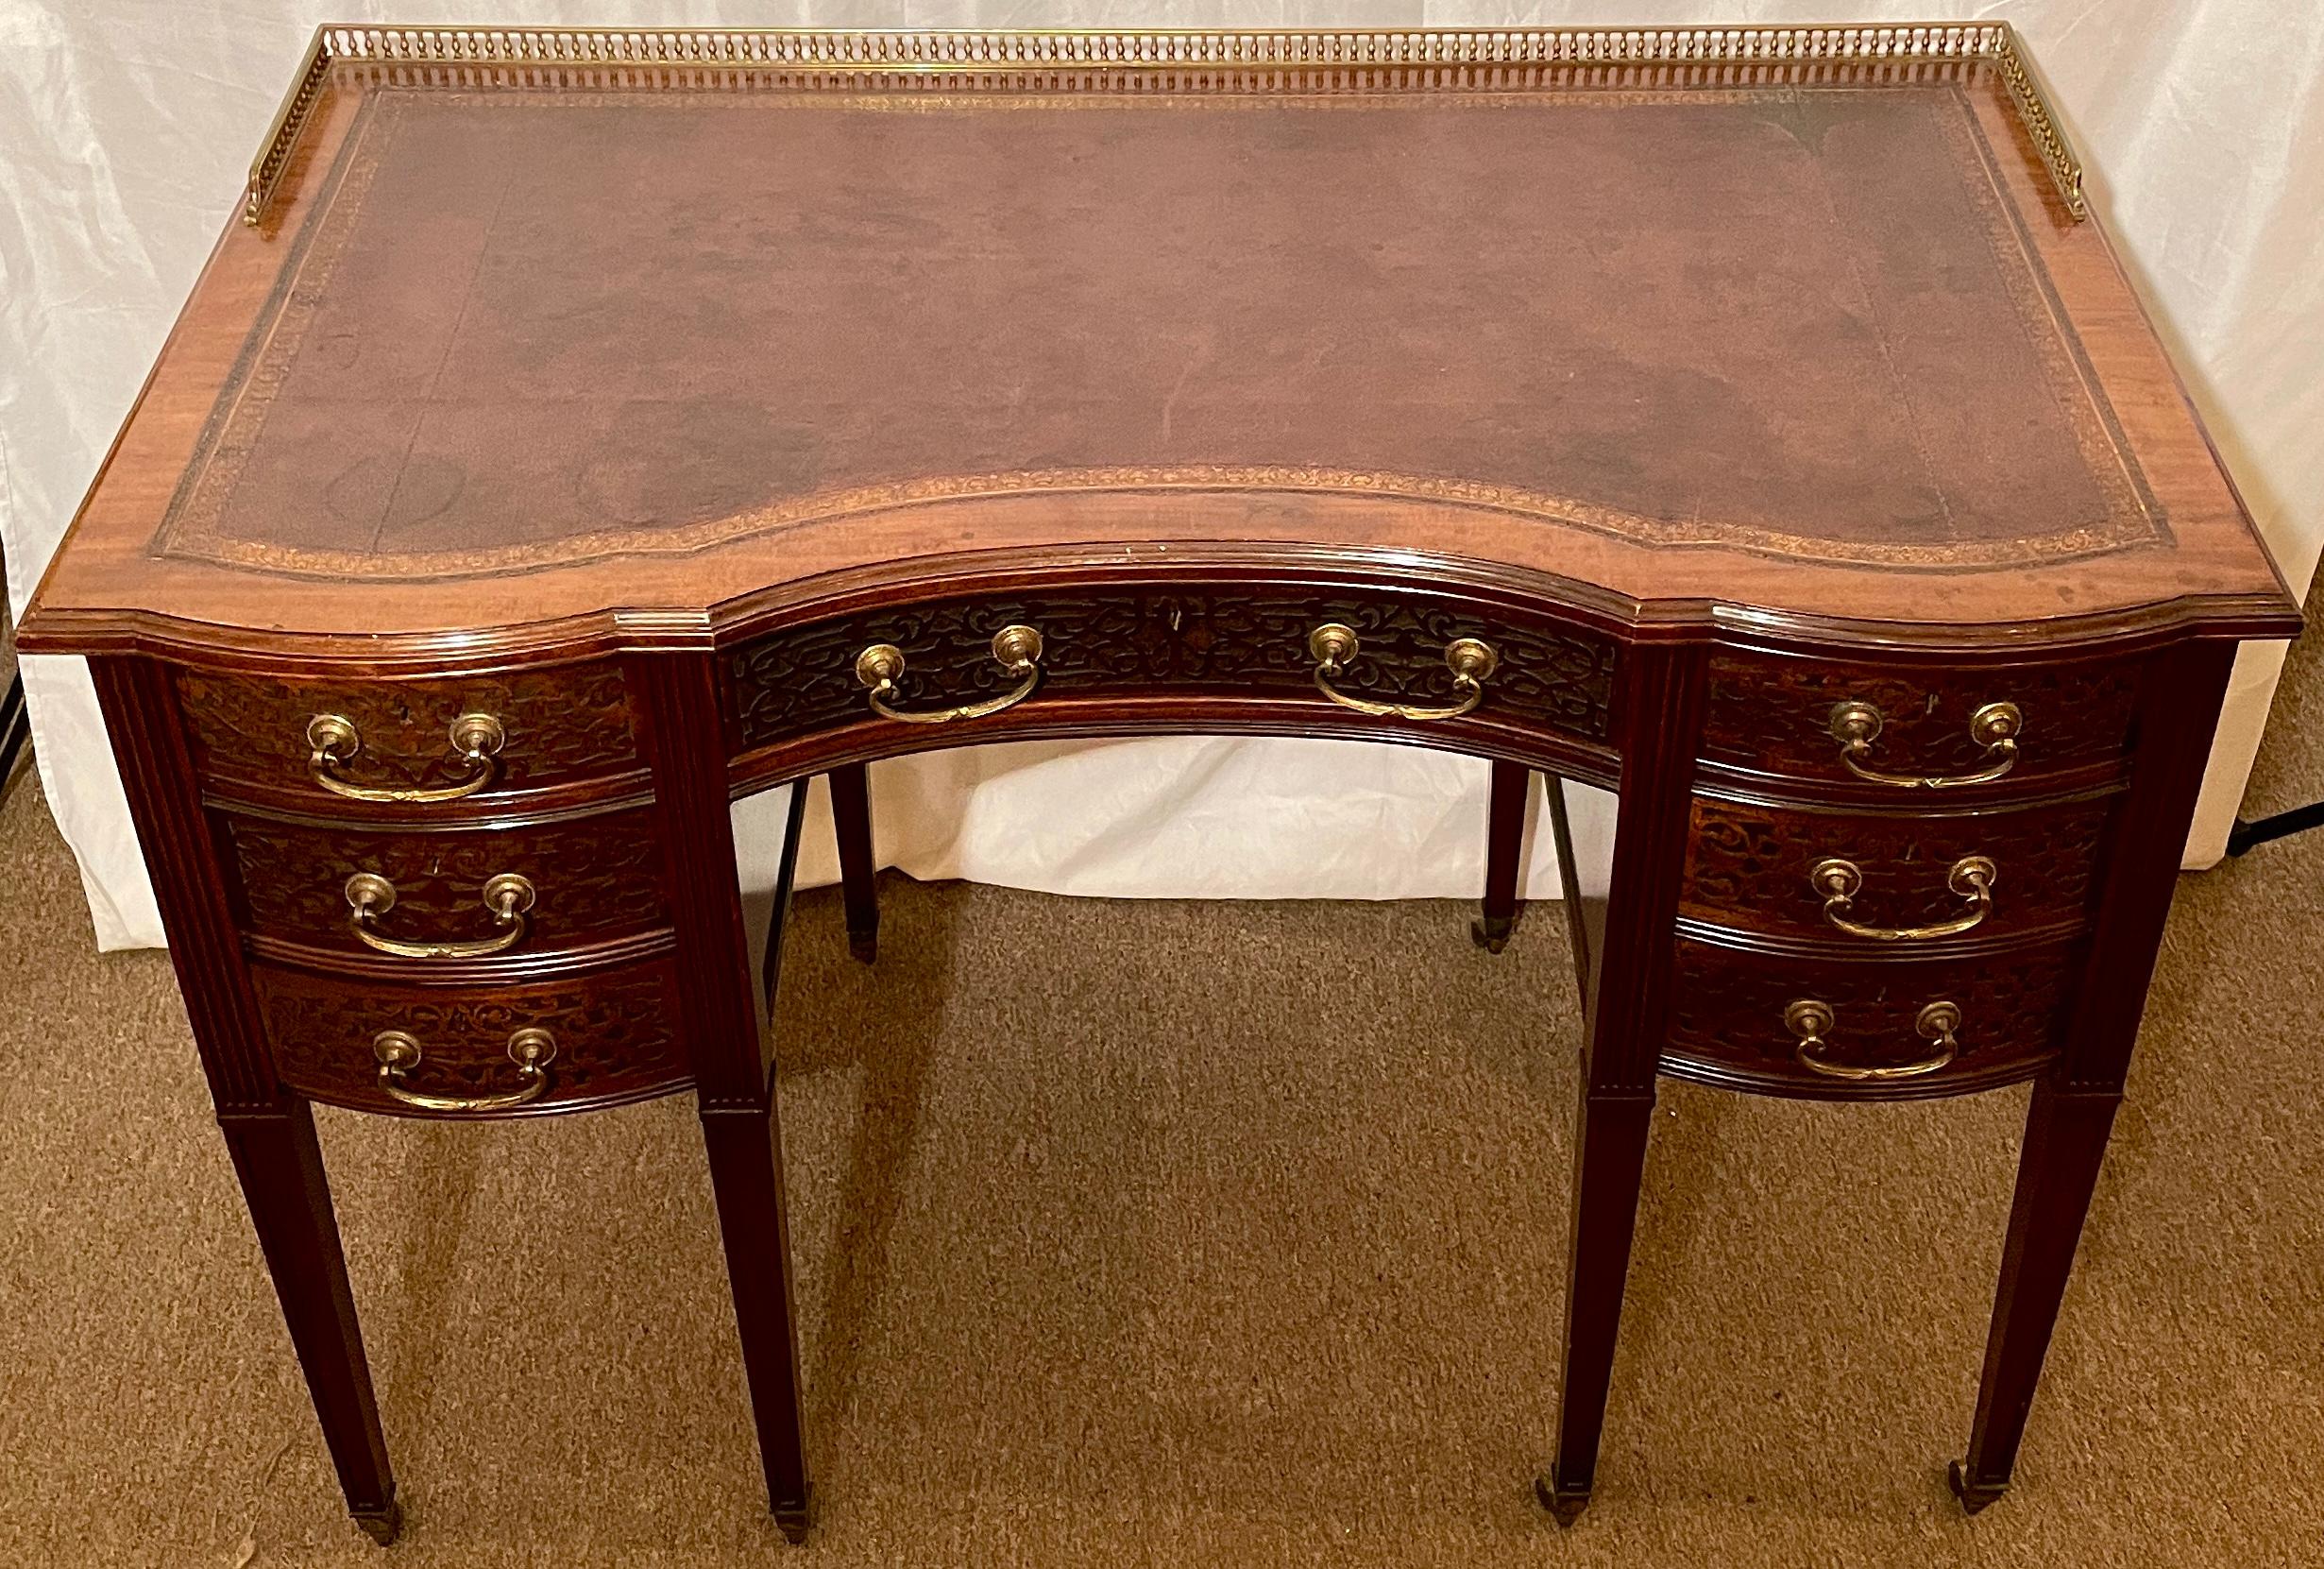 Antique English mahogany writing desk with Chippendale fretwork and Galleried top, circa 1880. Made by Edwards & Roberts.